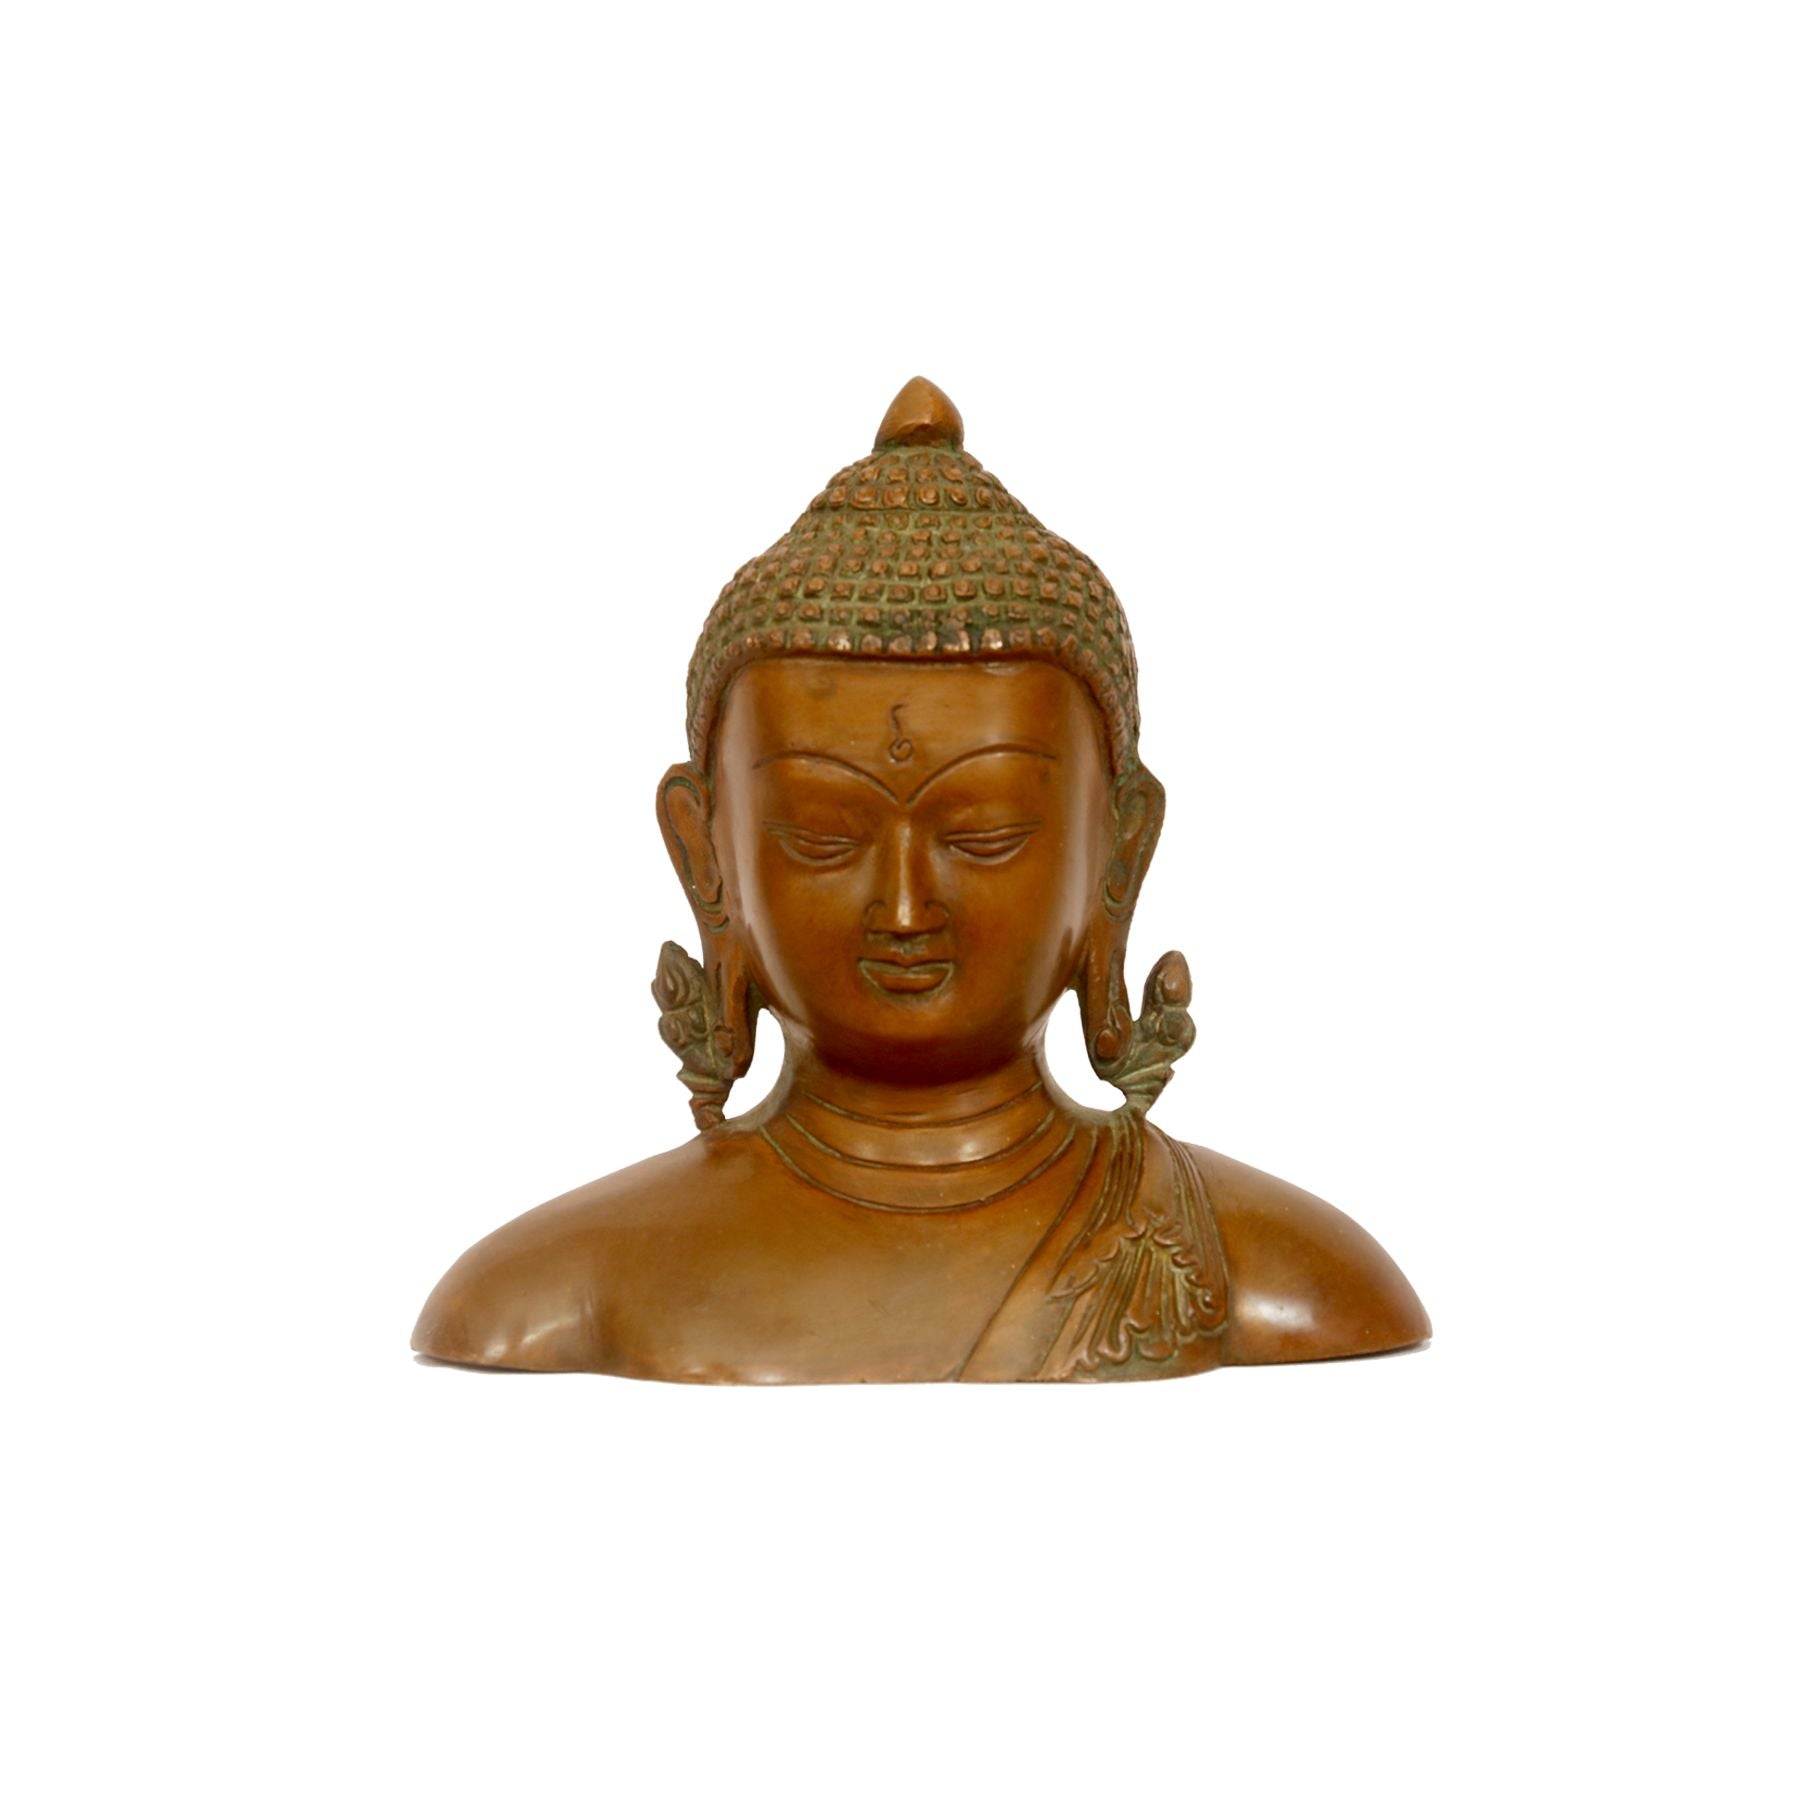 Antique Solid Metal Buddha Bust/Head Statue Statue